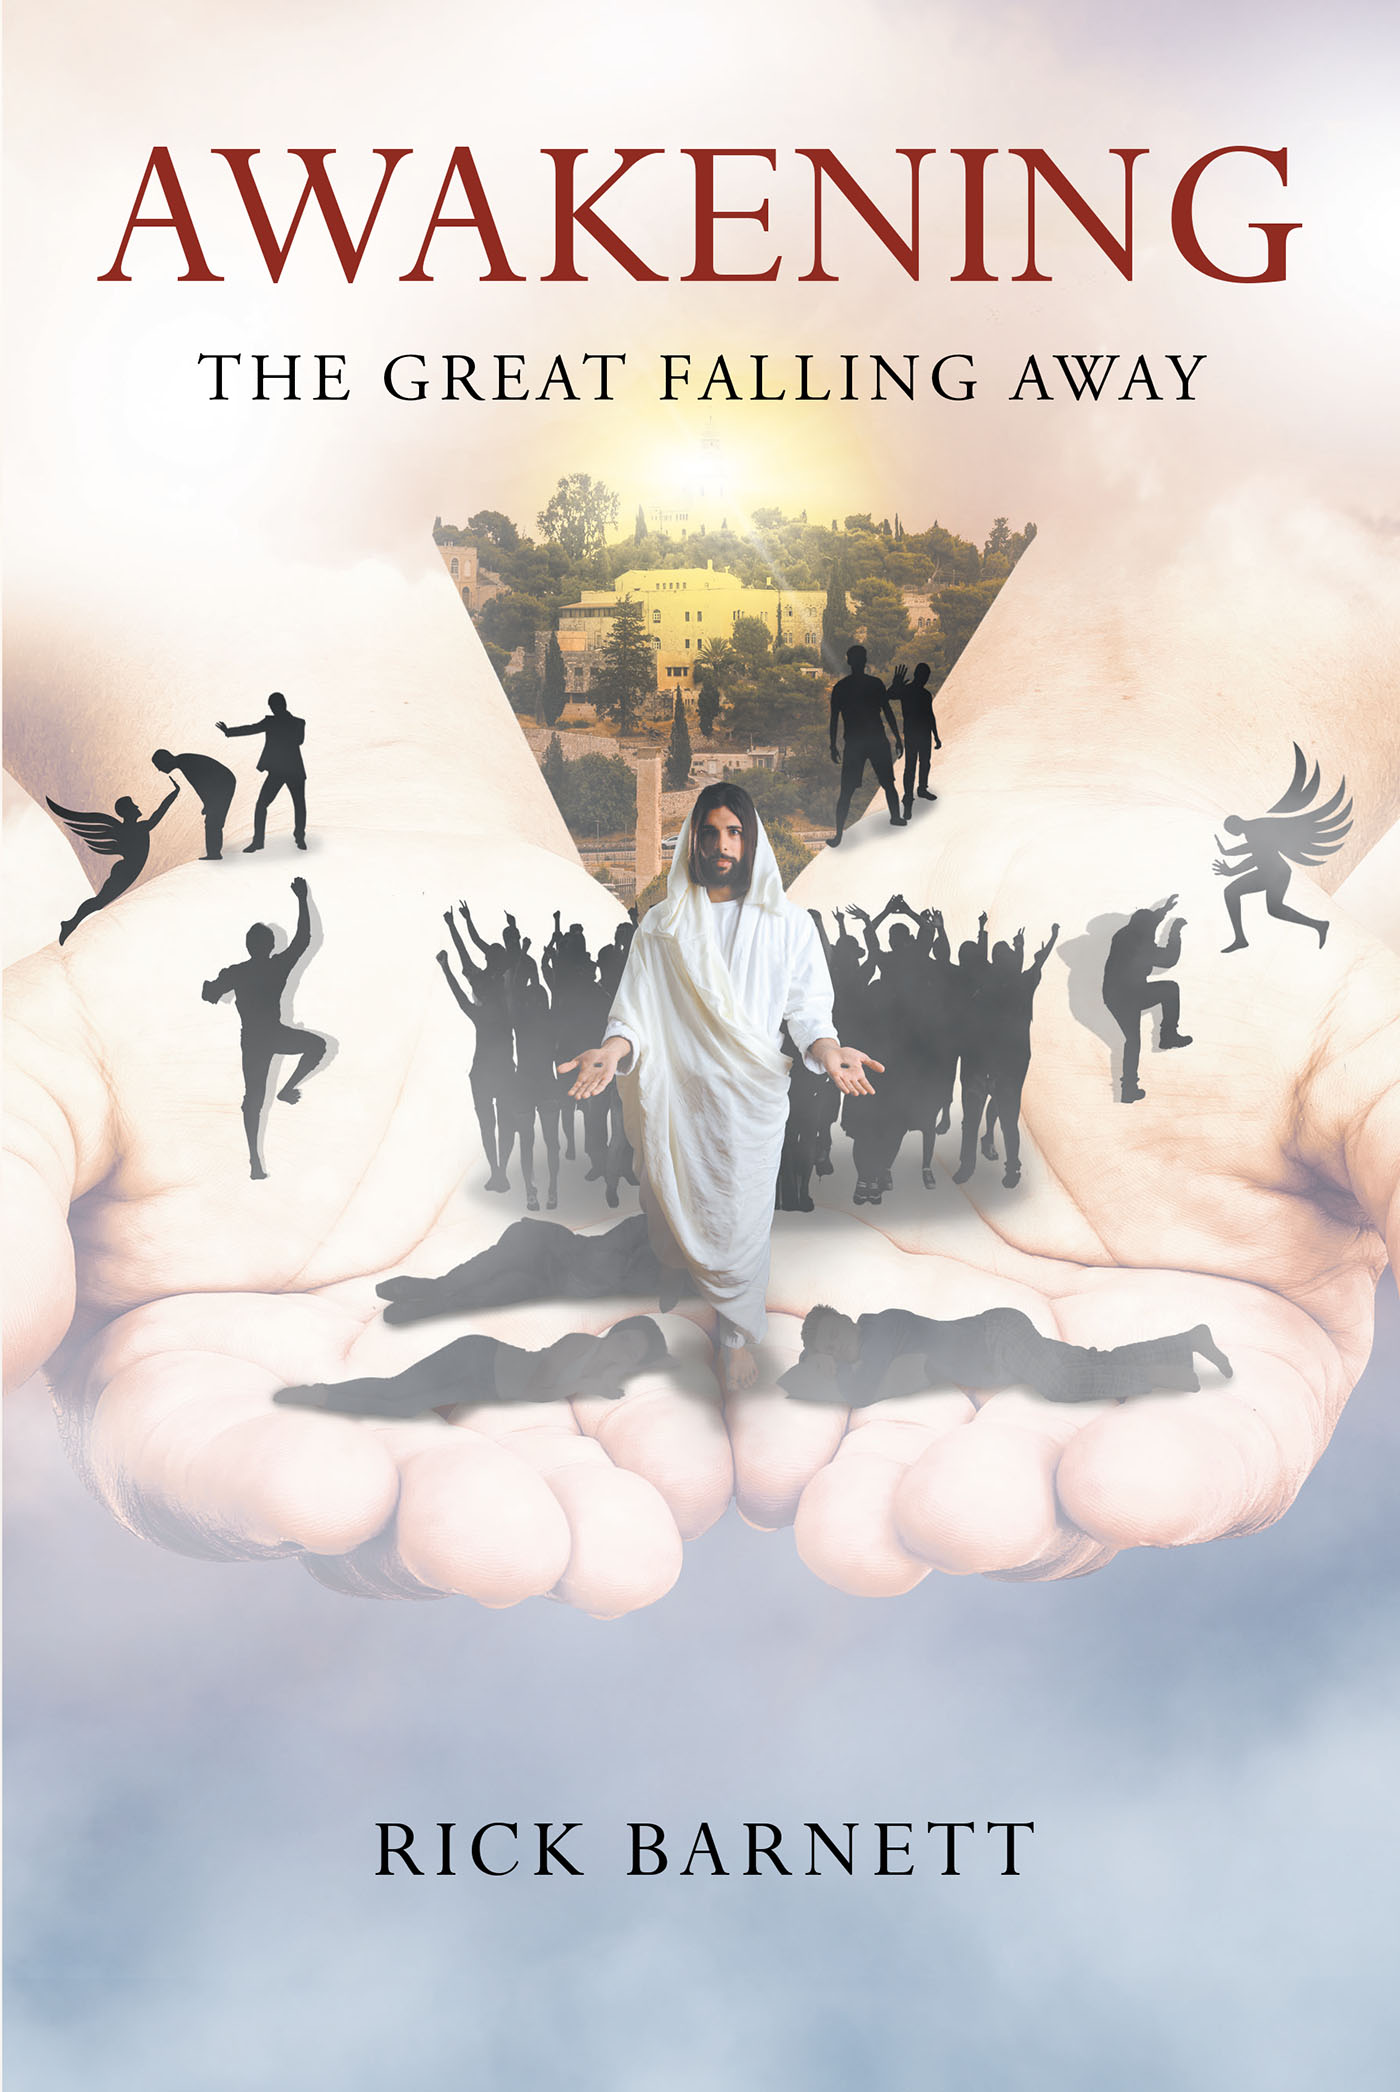 Rick Barnett’s New Book, "AWAKENING: The Great Falling Away," is a Compelling Work That Calls Blinded Souls and Former Christians Back to the Righteous Path of Christ